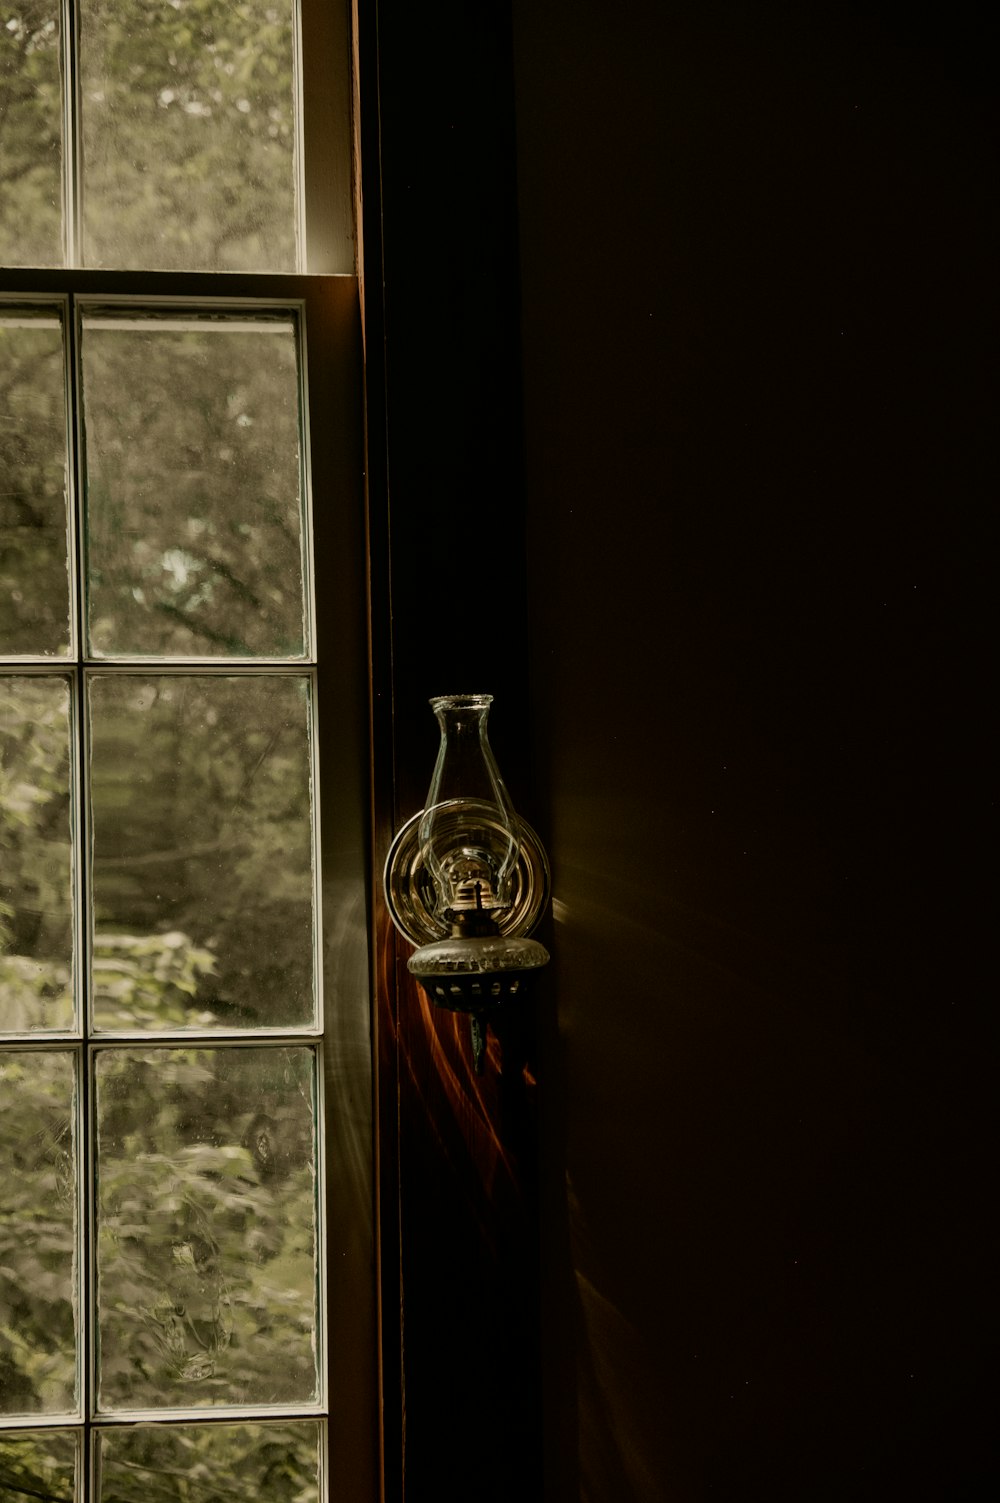 a glass vase sitting on a window sill next to a window